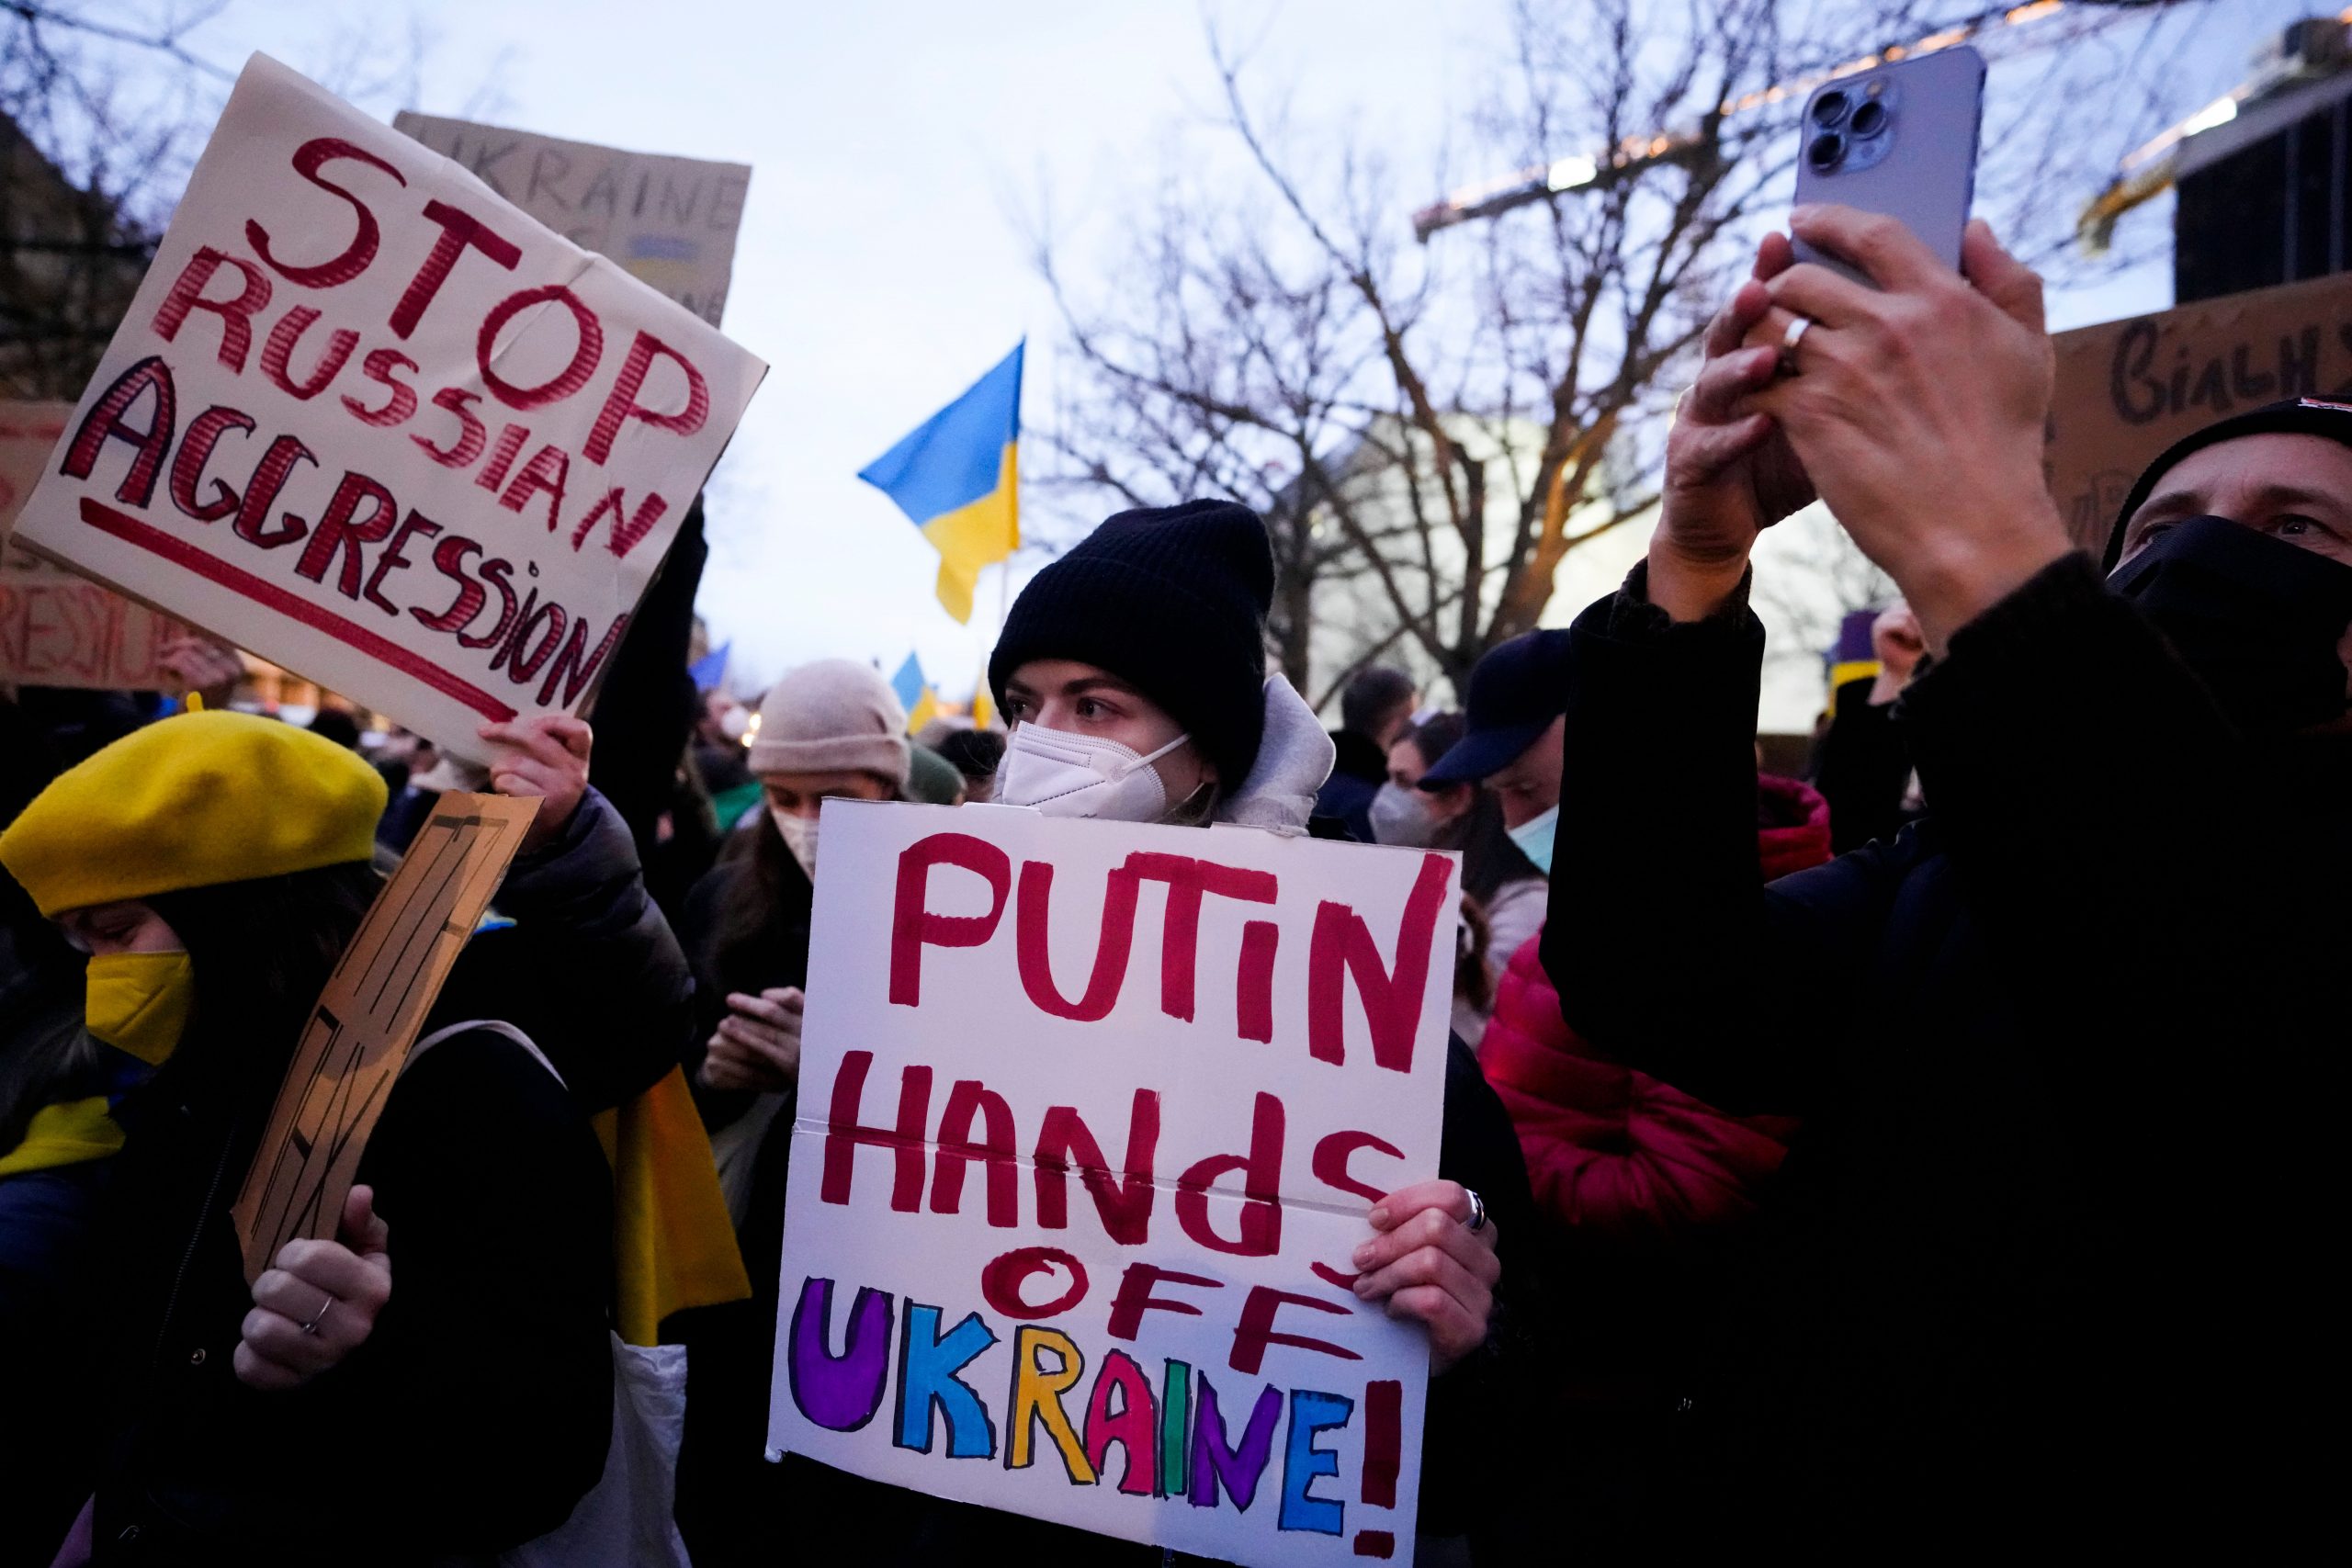 Russia-Ukraine crisis: More than 1,700 anti-war protesters detained in Russia